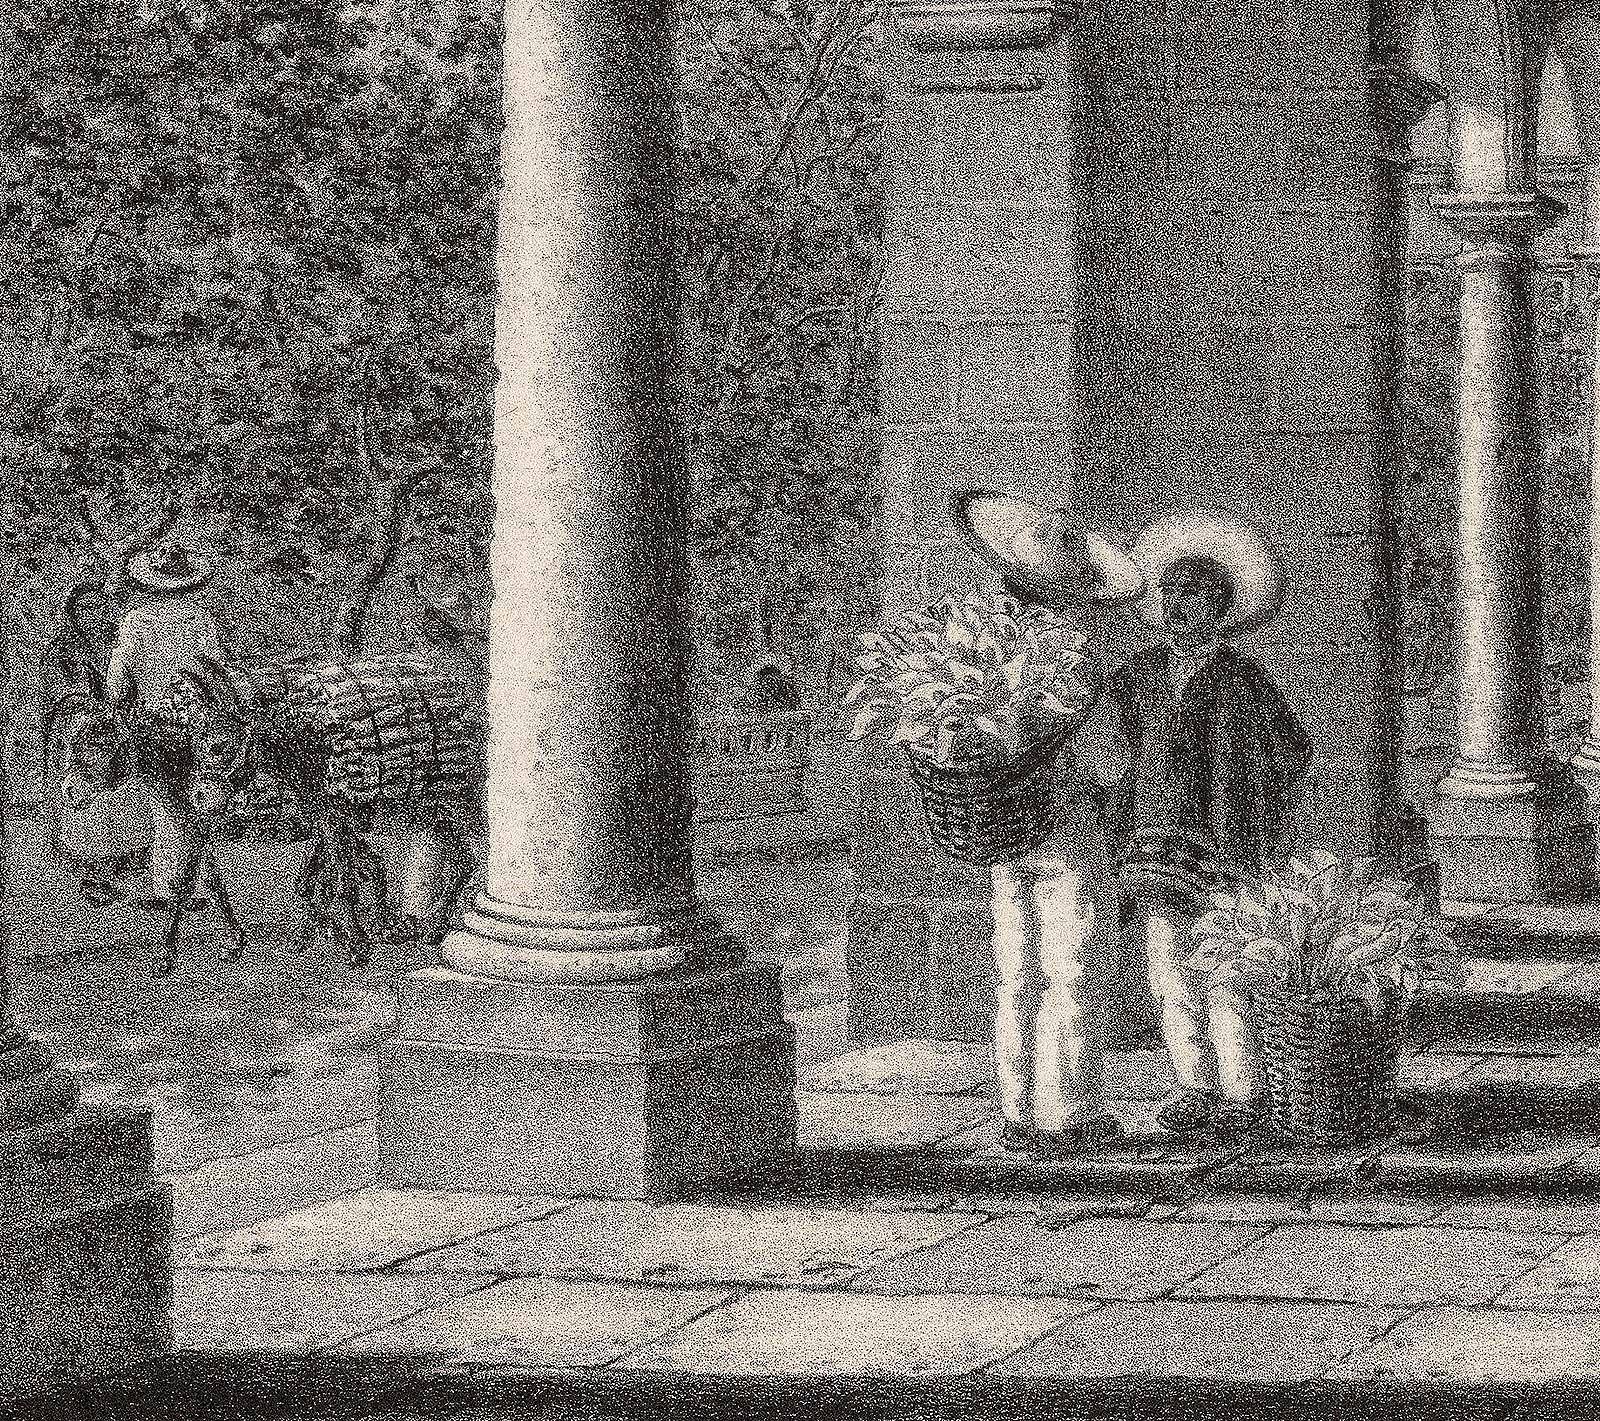 Flower Sellers (Market day in Mexico underneath the colonnade) - Print by Alan Horton Crane